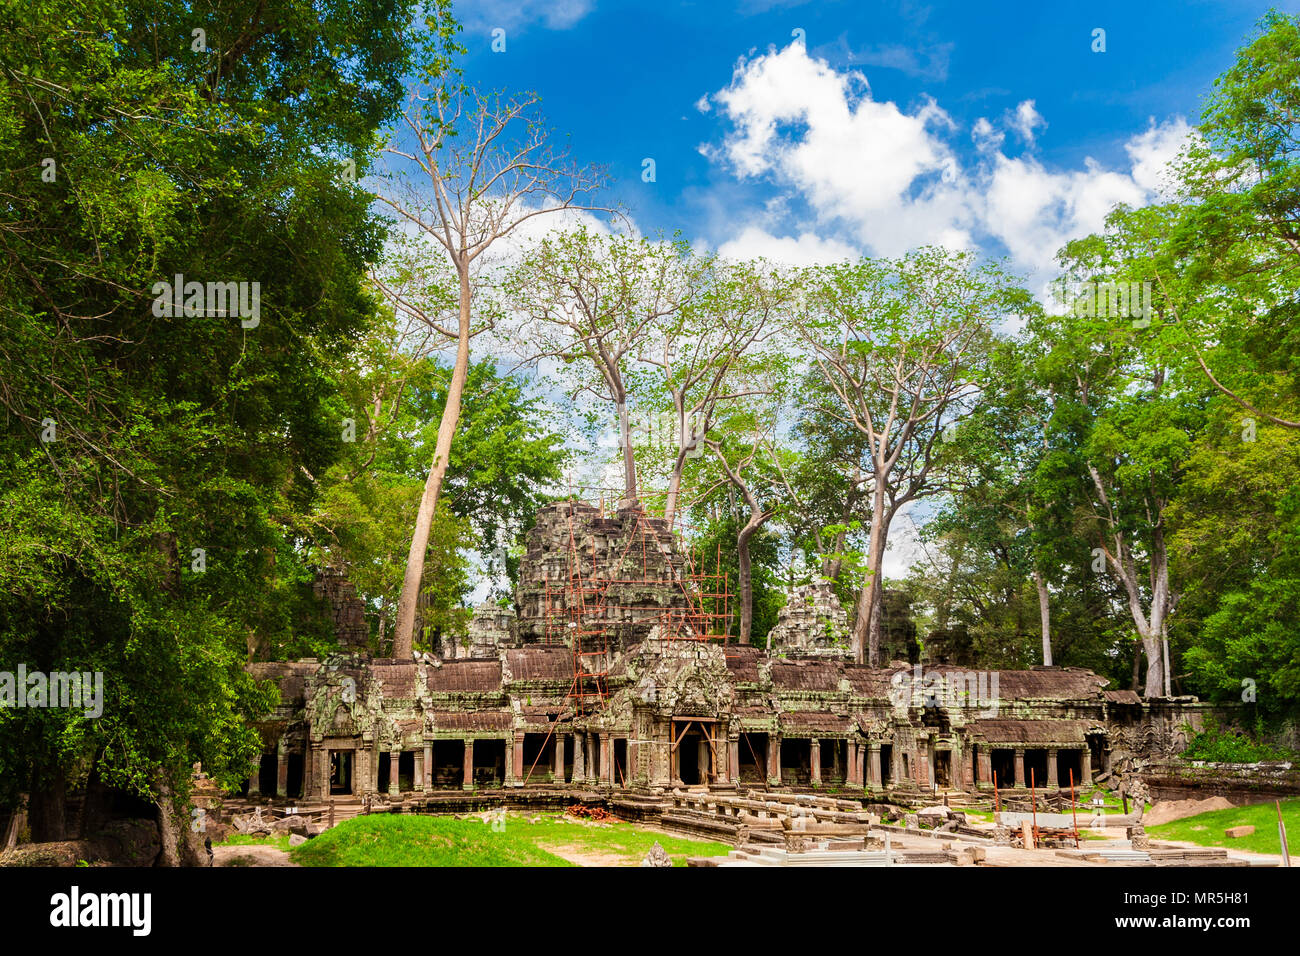 The beautiful ancient gate ruin on the east side with a long causeway, surrounded by huge trees, is leading to the inner part of the Ta Prohm temple. Stock Photo